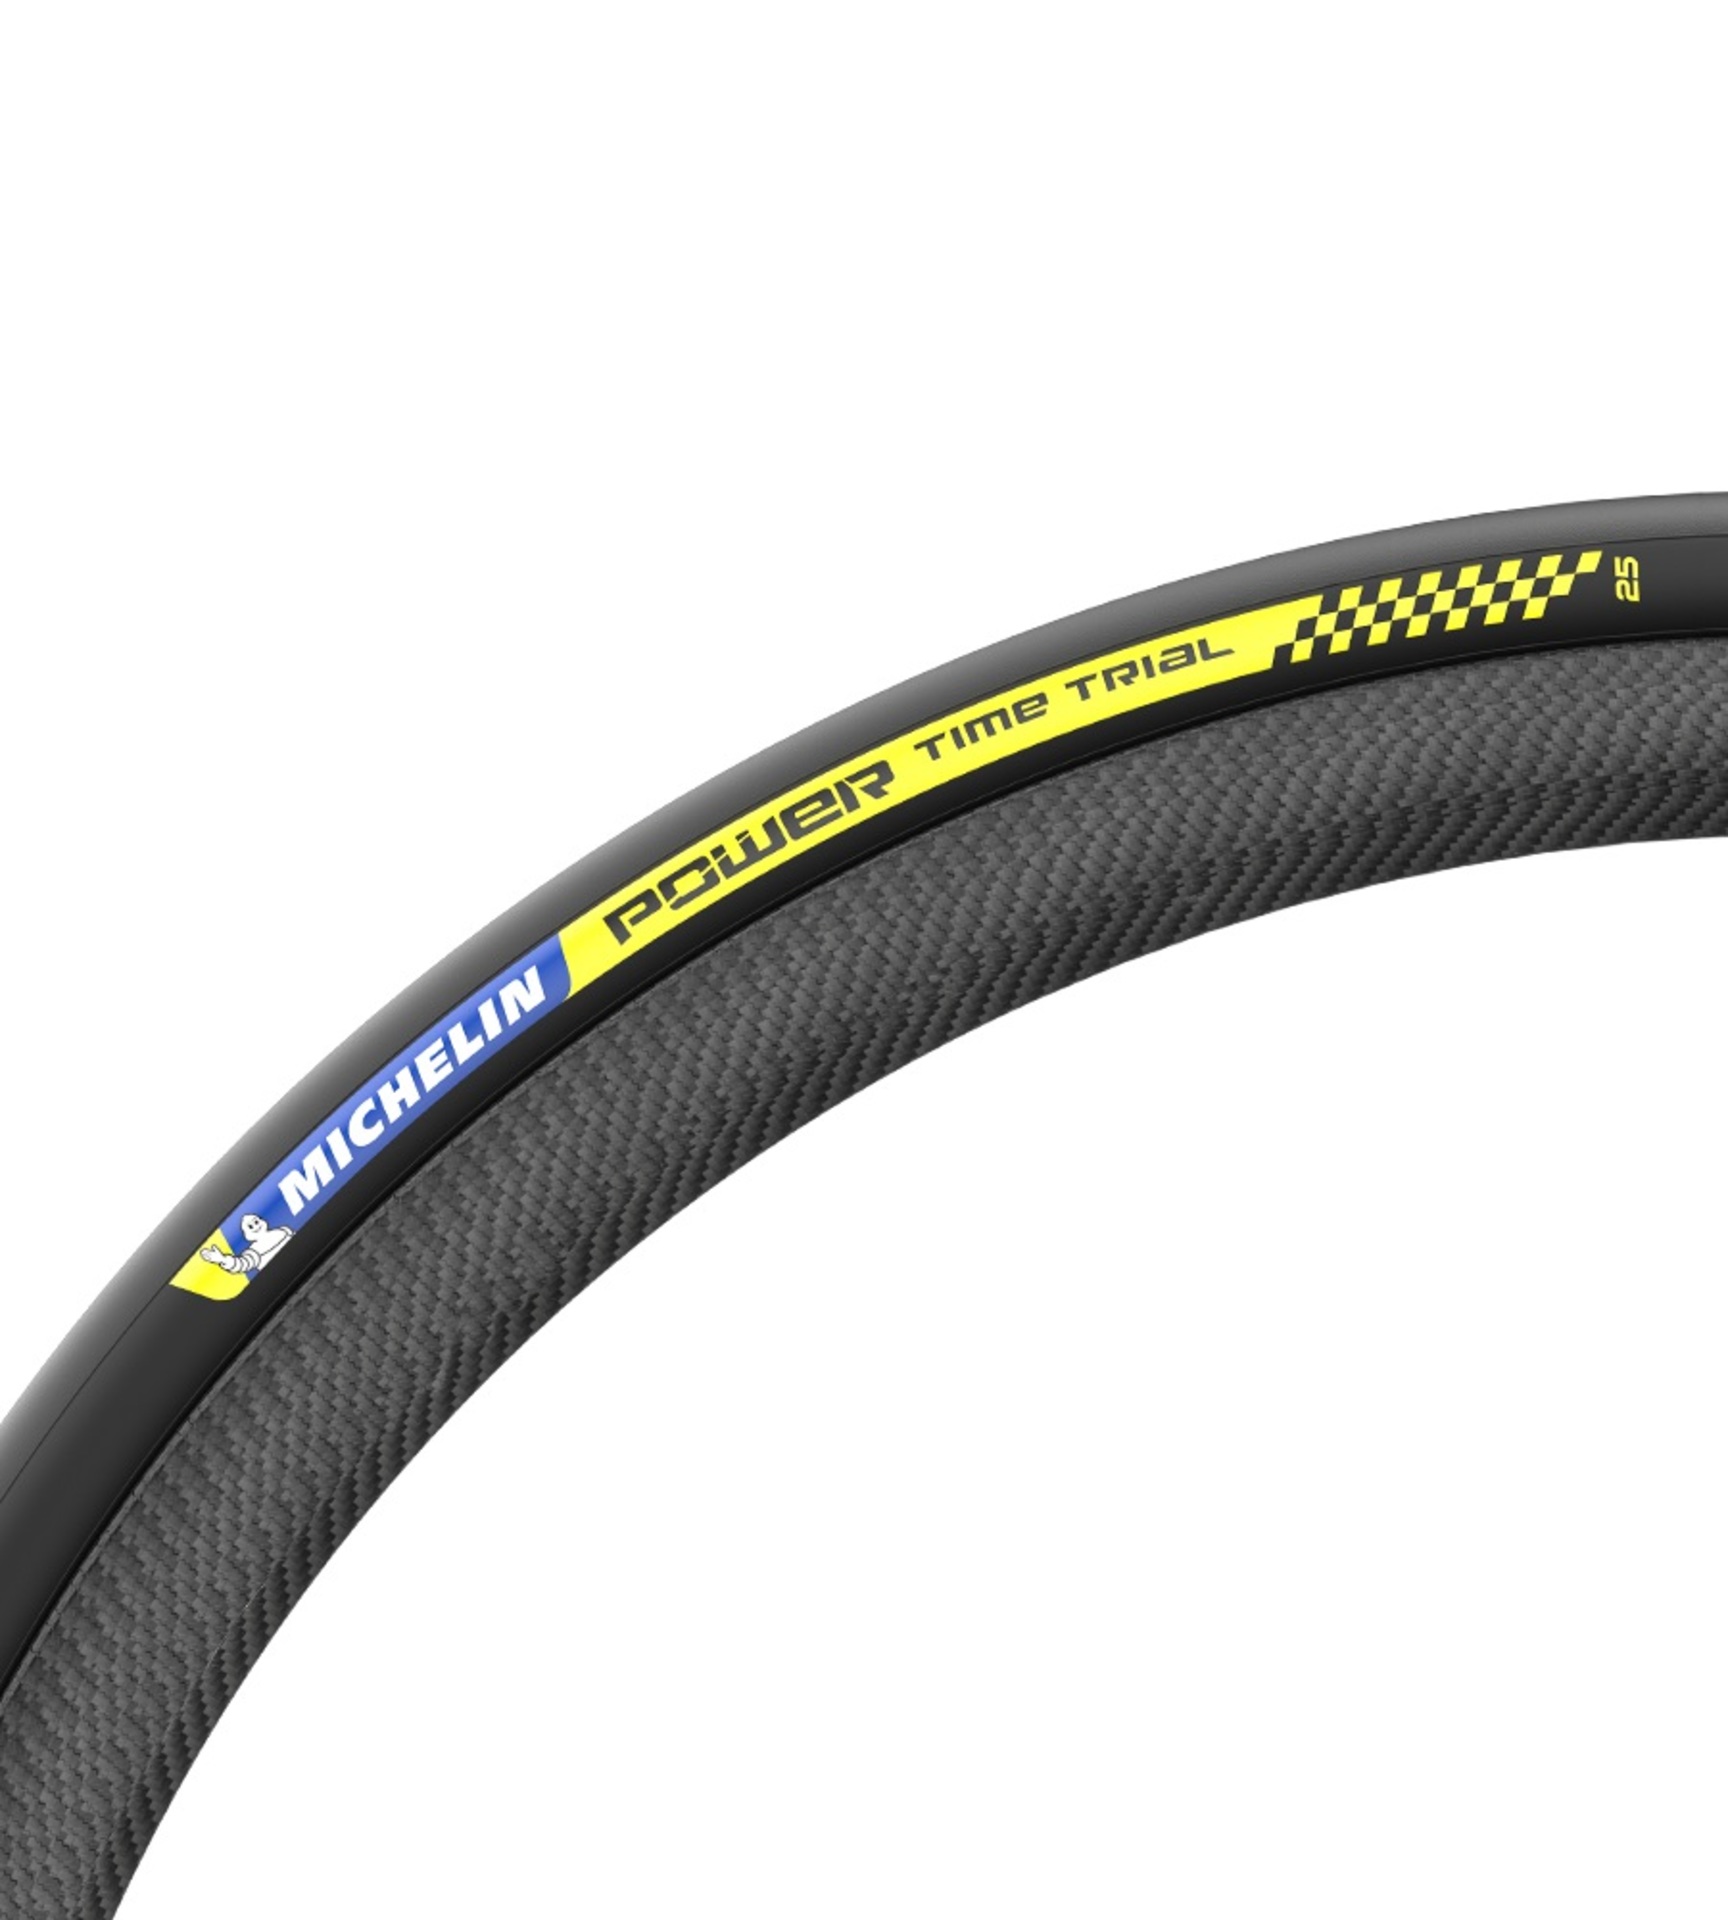 Michelin Power Time Trial Racefiets Band Zwart